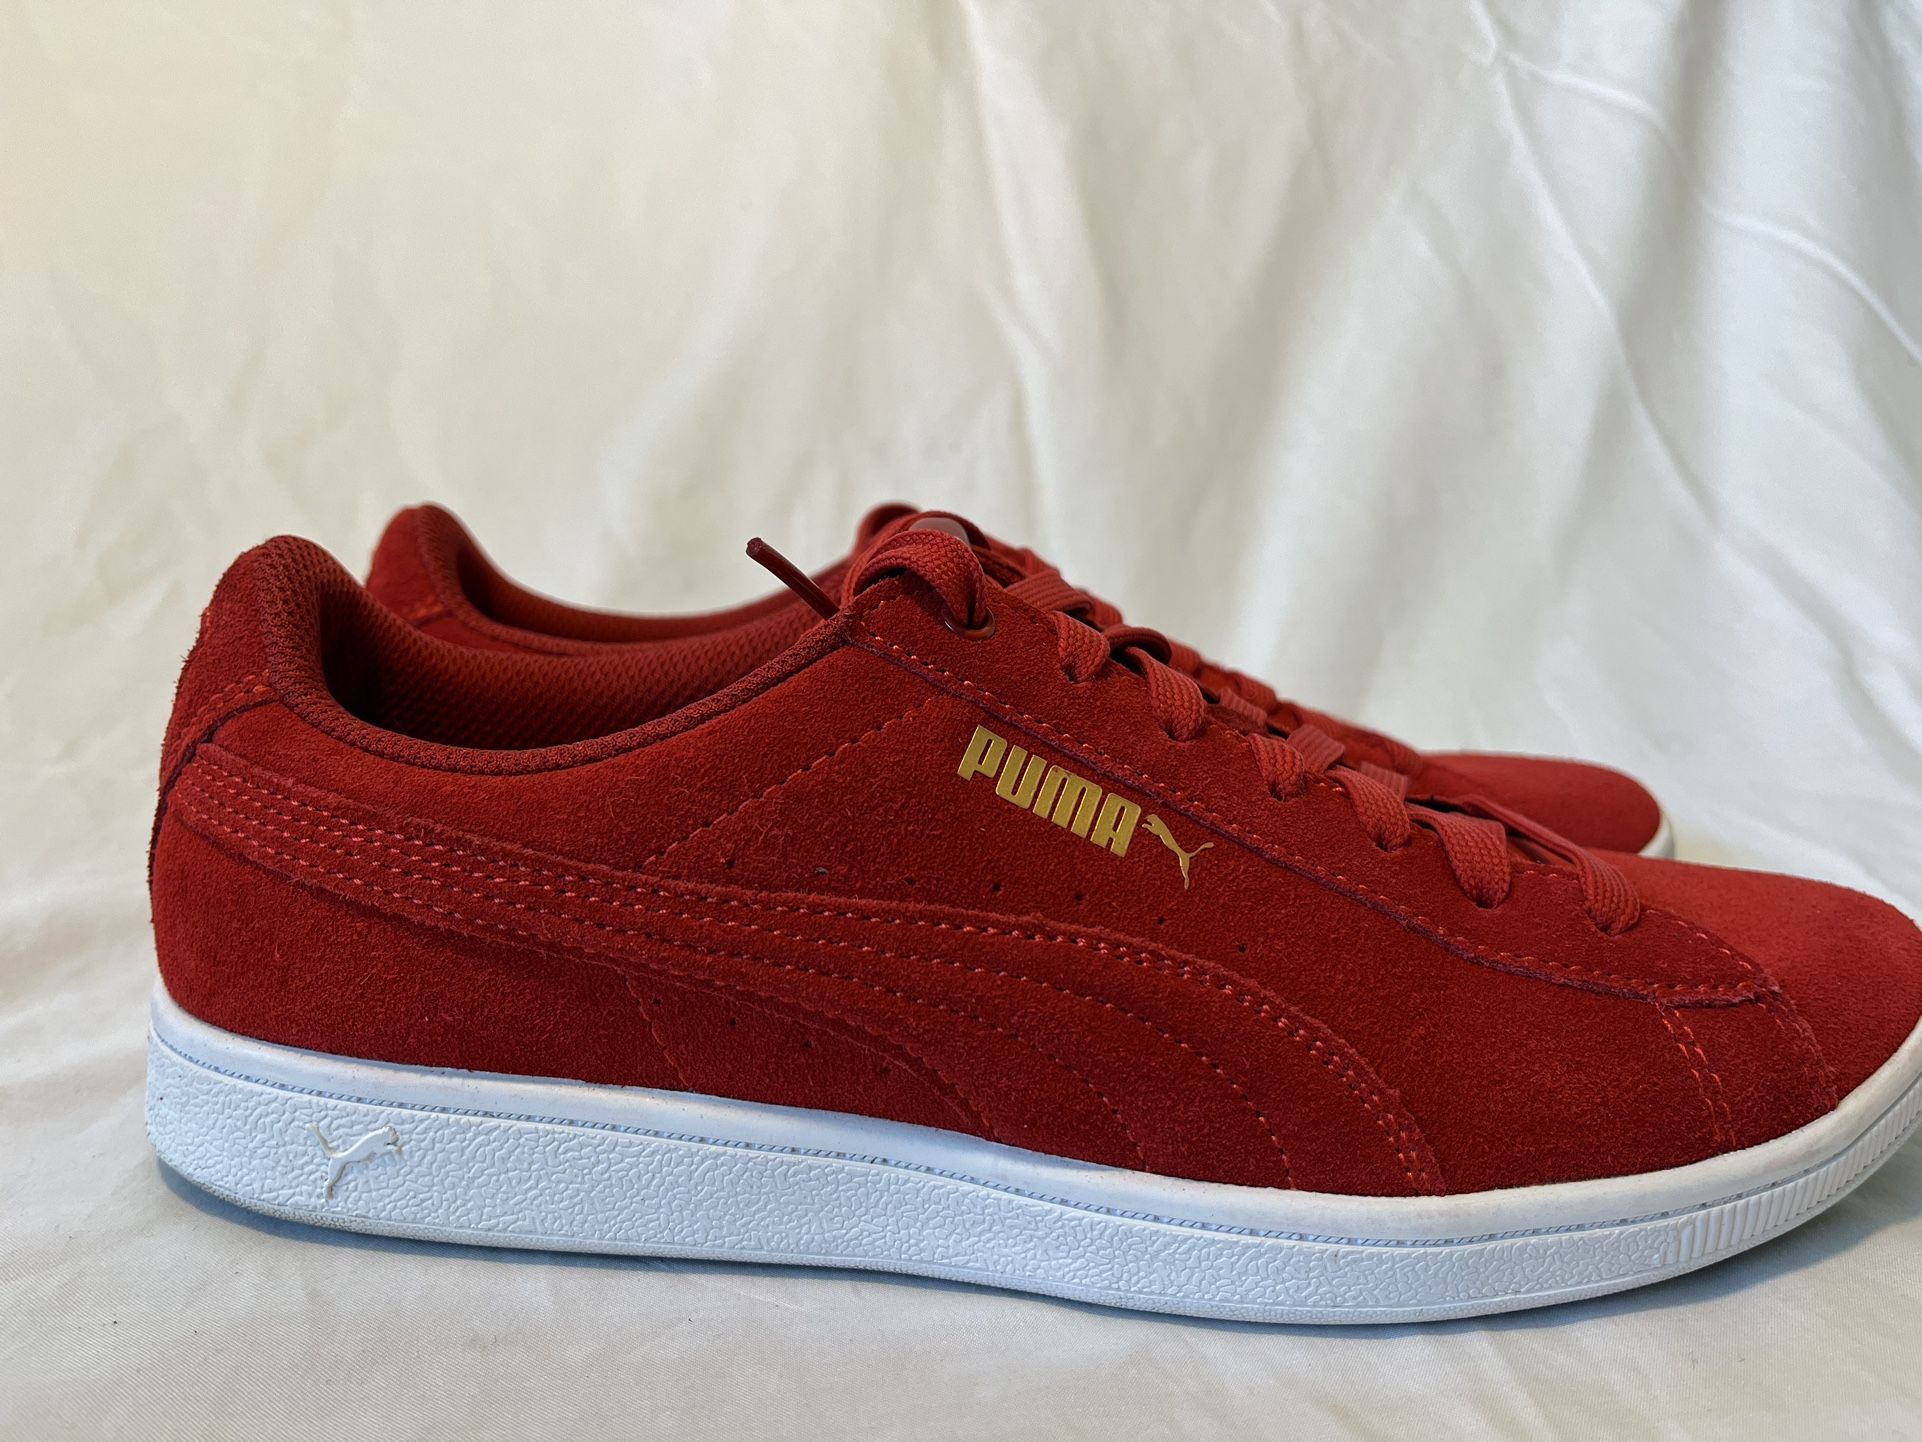 Puma Tennis shoes / Sneakers / Lace Up / 